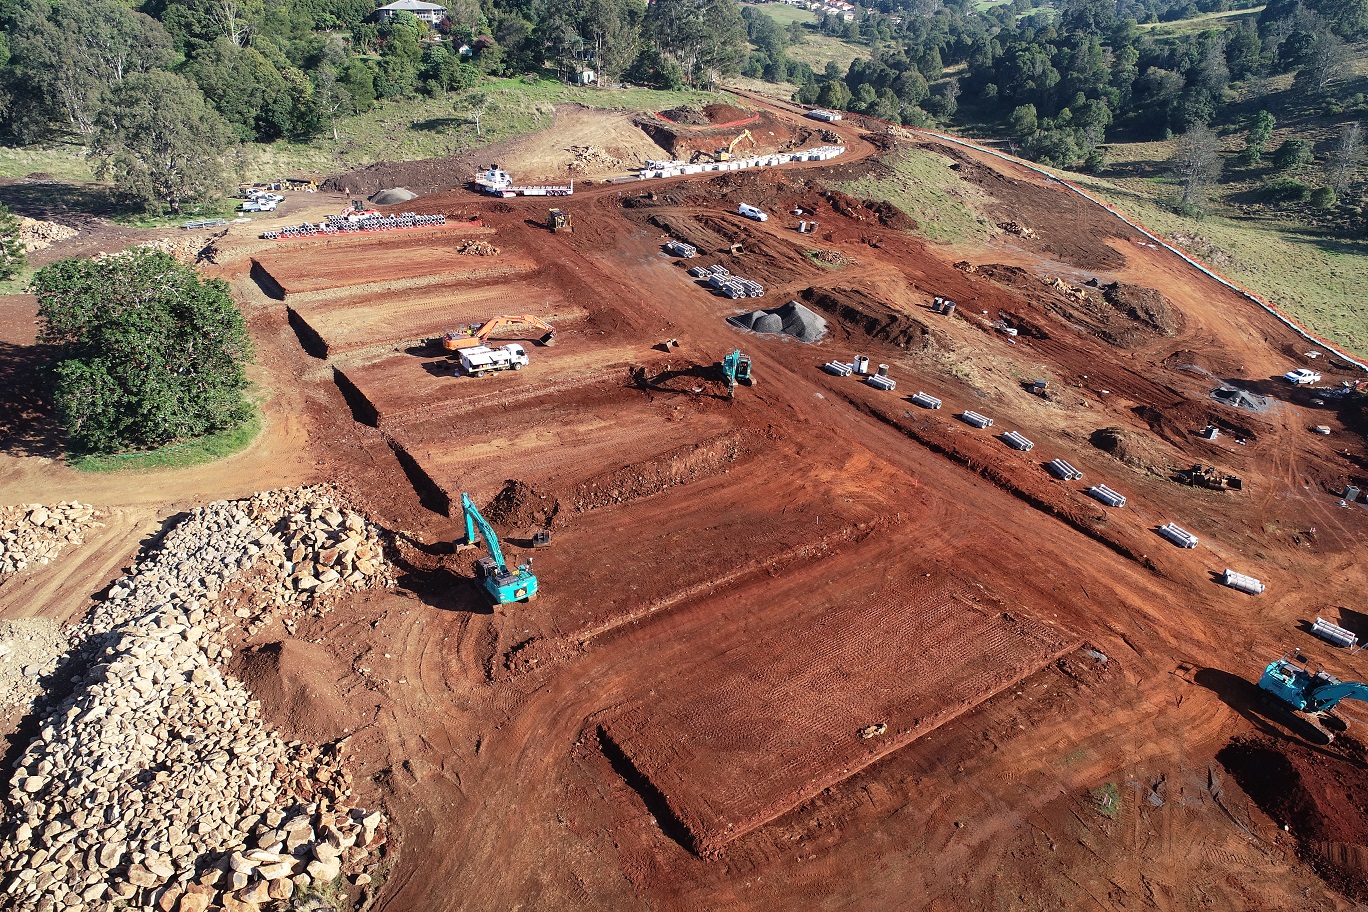 Stage 1 includes earthworks for the initial residential blocks in the development